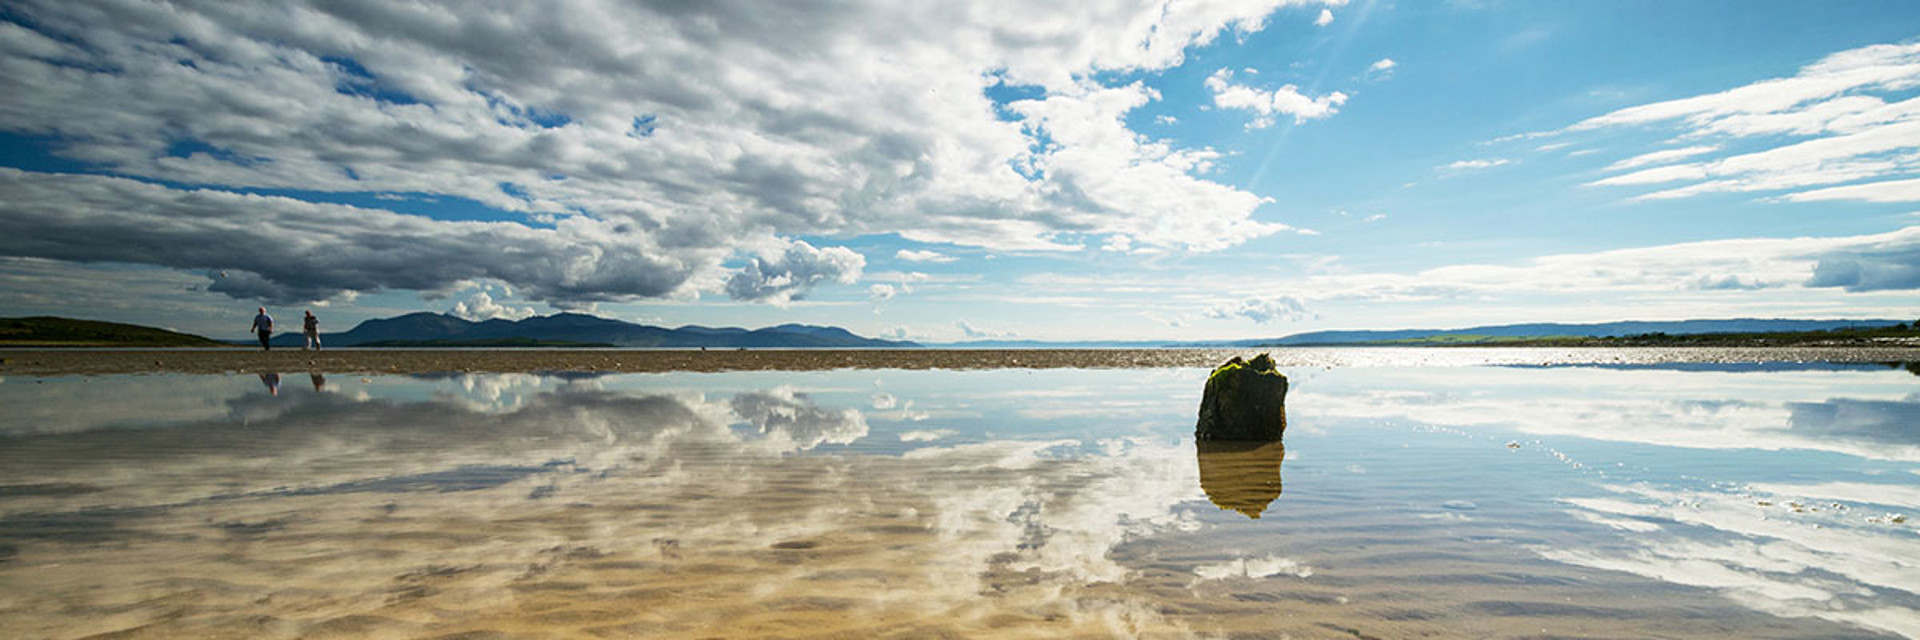 Background image - Bute Beach Ettrick Mt Photography